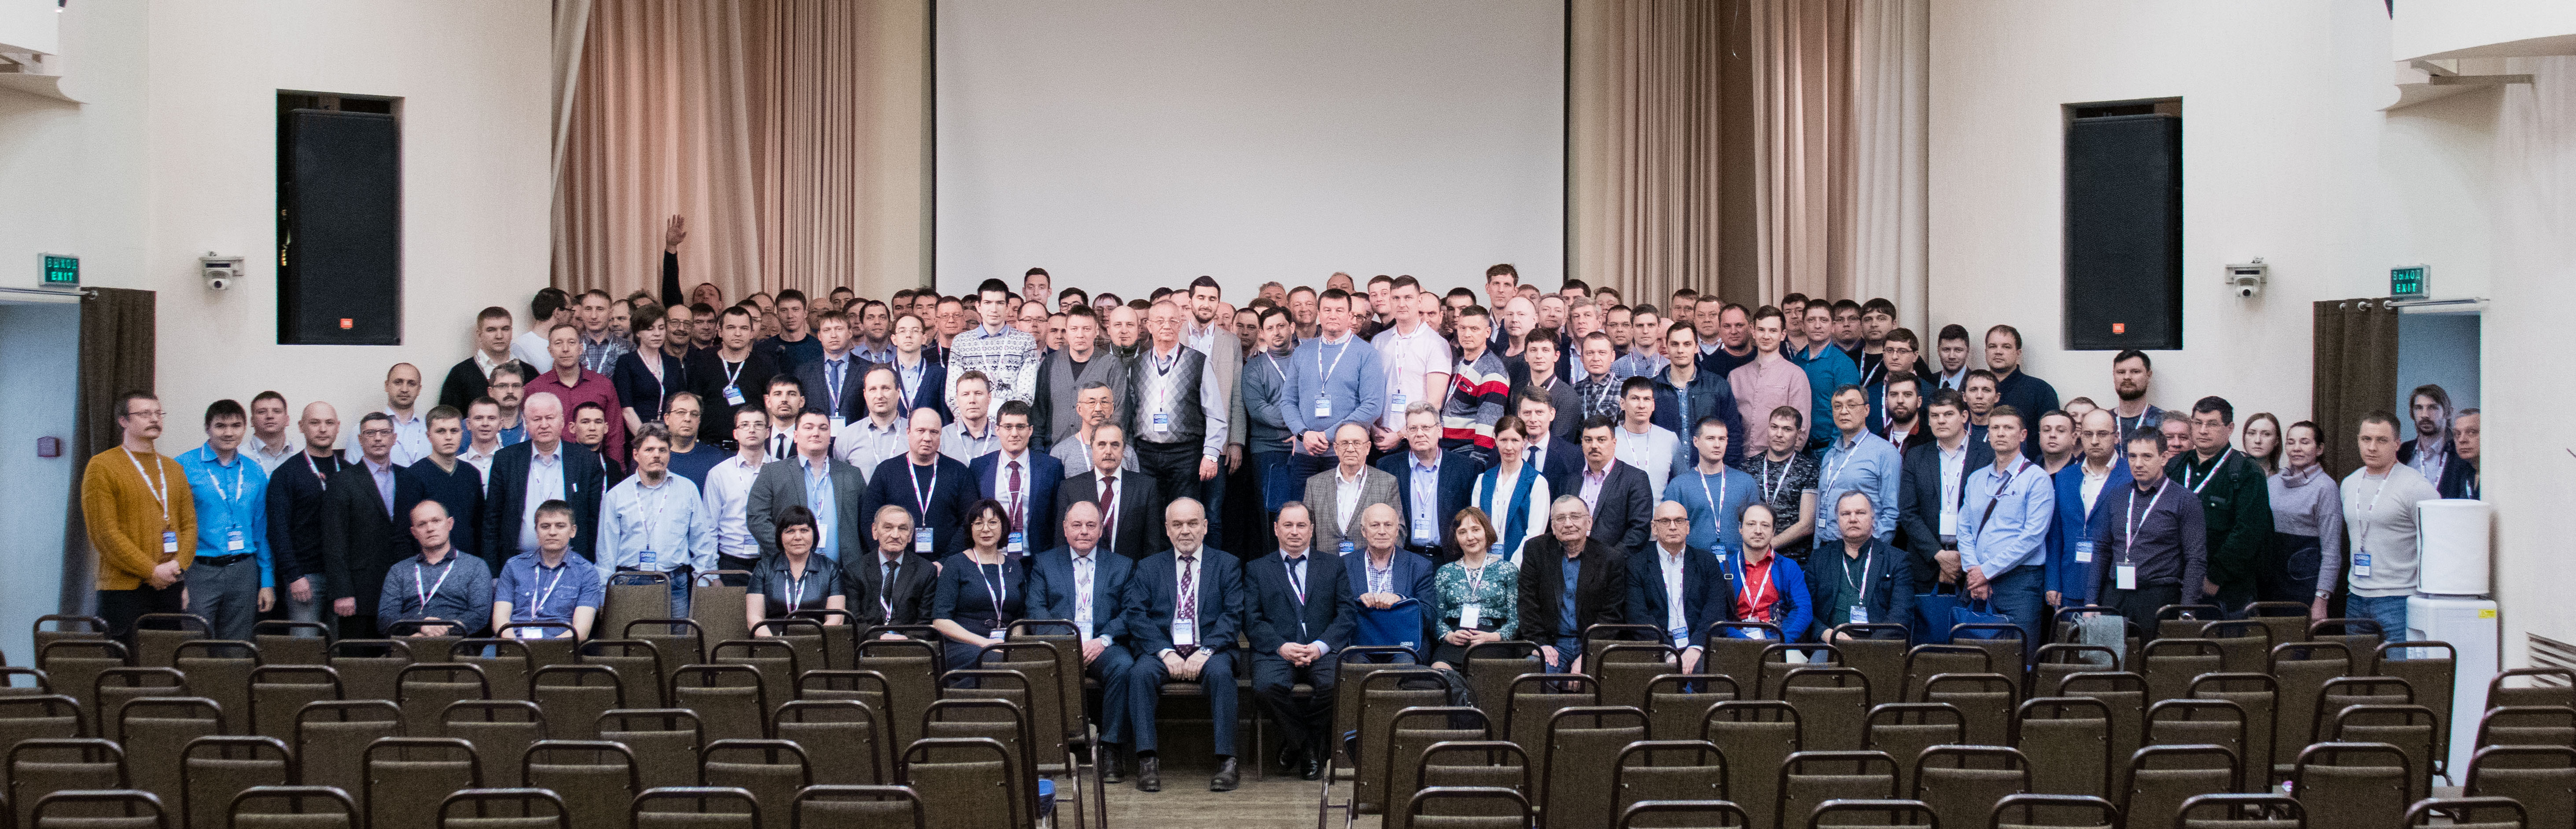 Participants of the successful 17th Dimrus conference in Perm